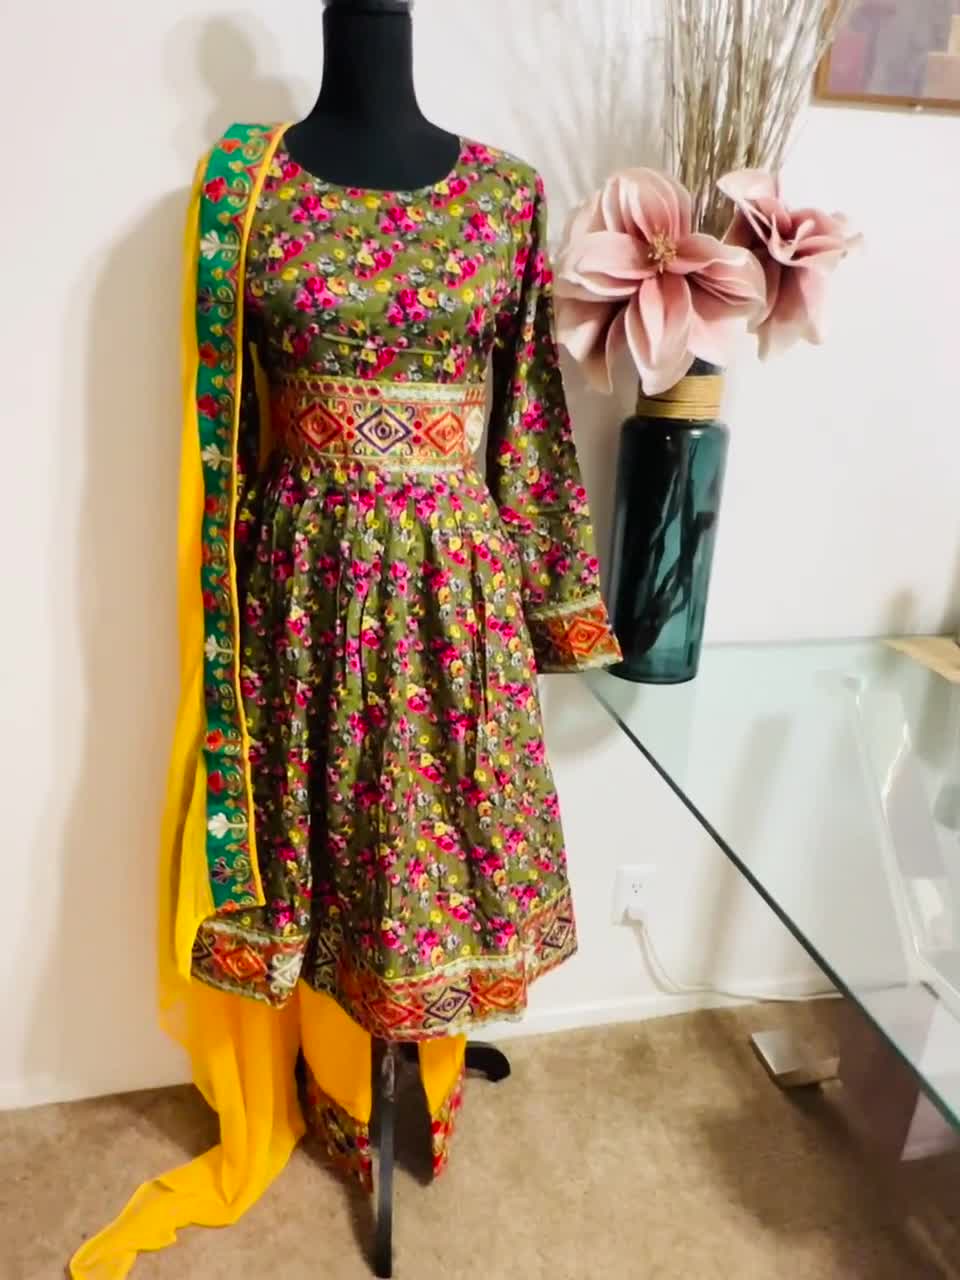 Three Piece Afghani Dress for Women With Embroidery Around